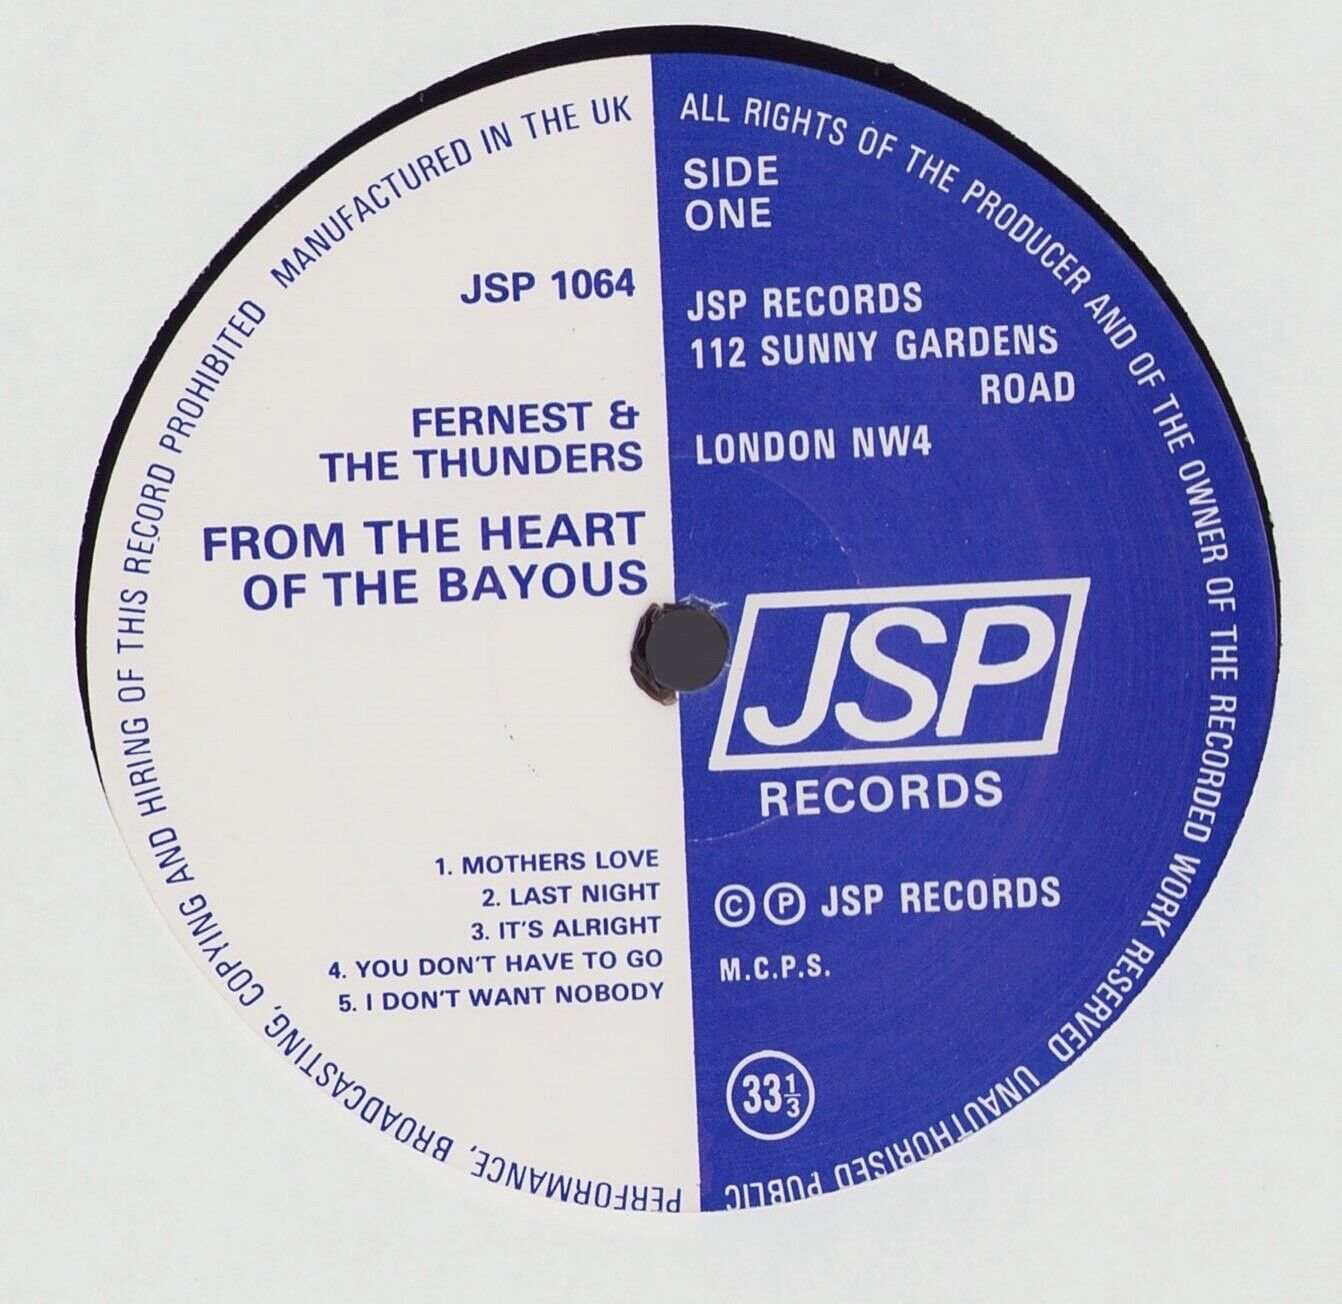 Fernest Arceneaux & His Louisiana French Band ‎- From The Heart Of The Bayou Vinyl LP